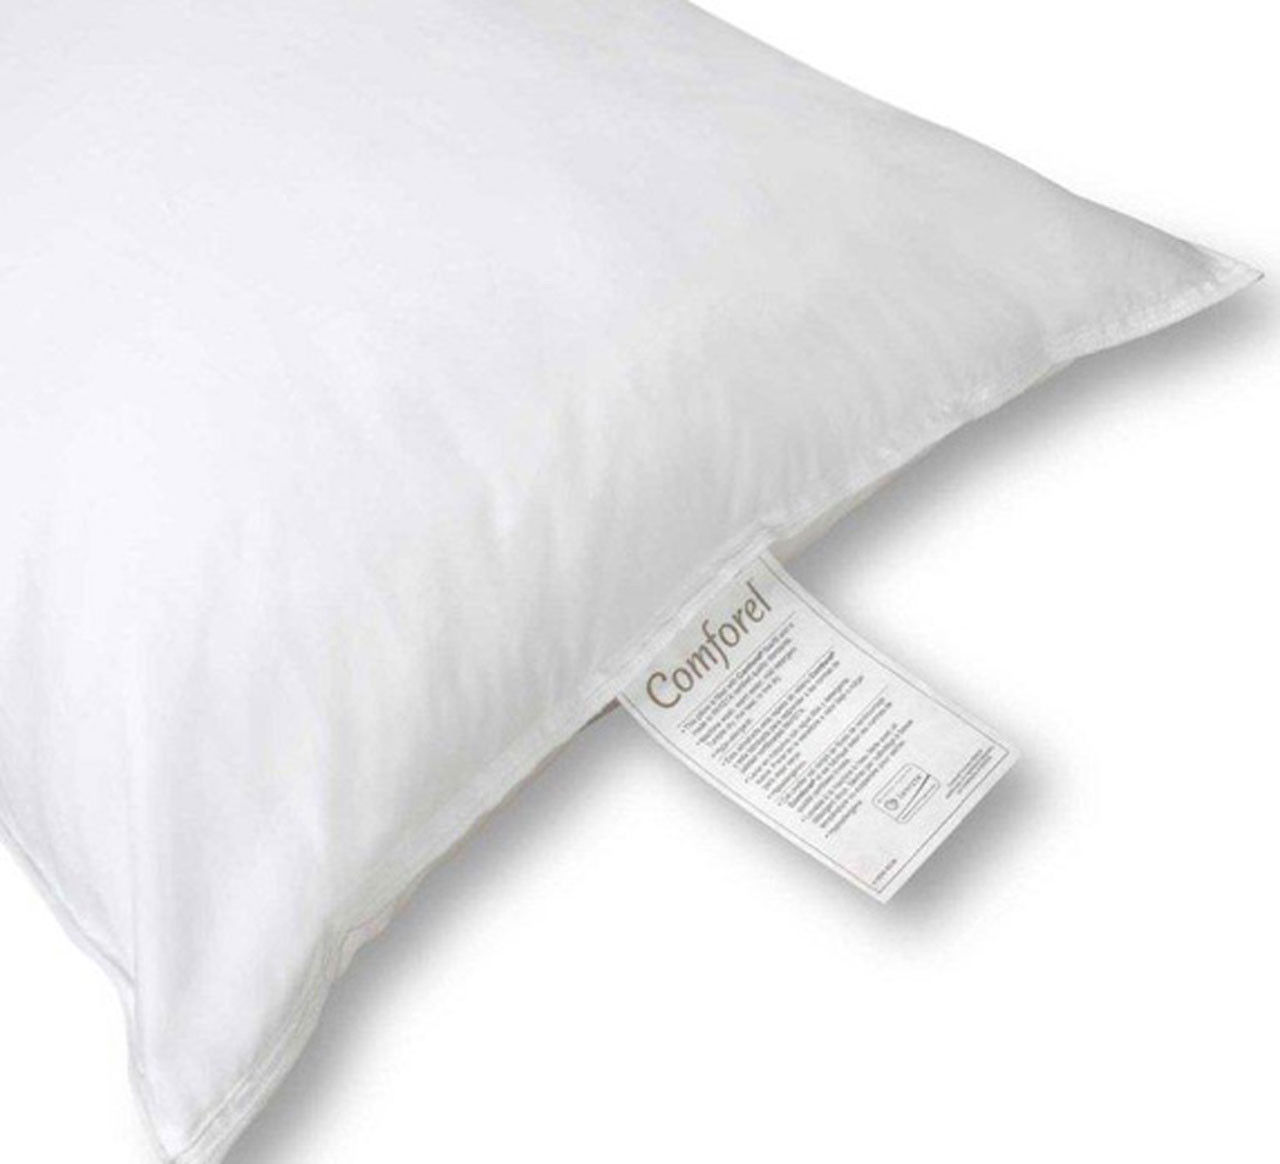 What is the origin of Comforel® pillows?